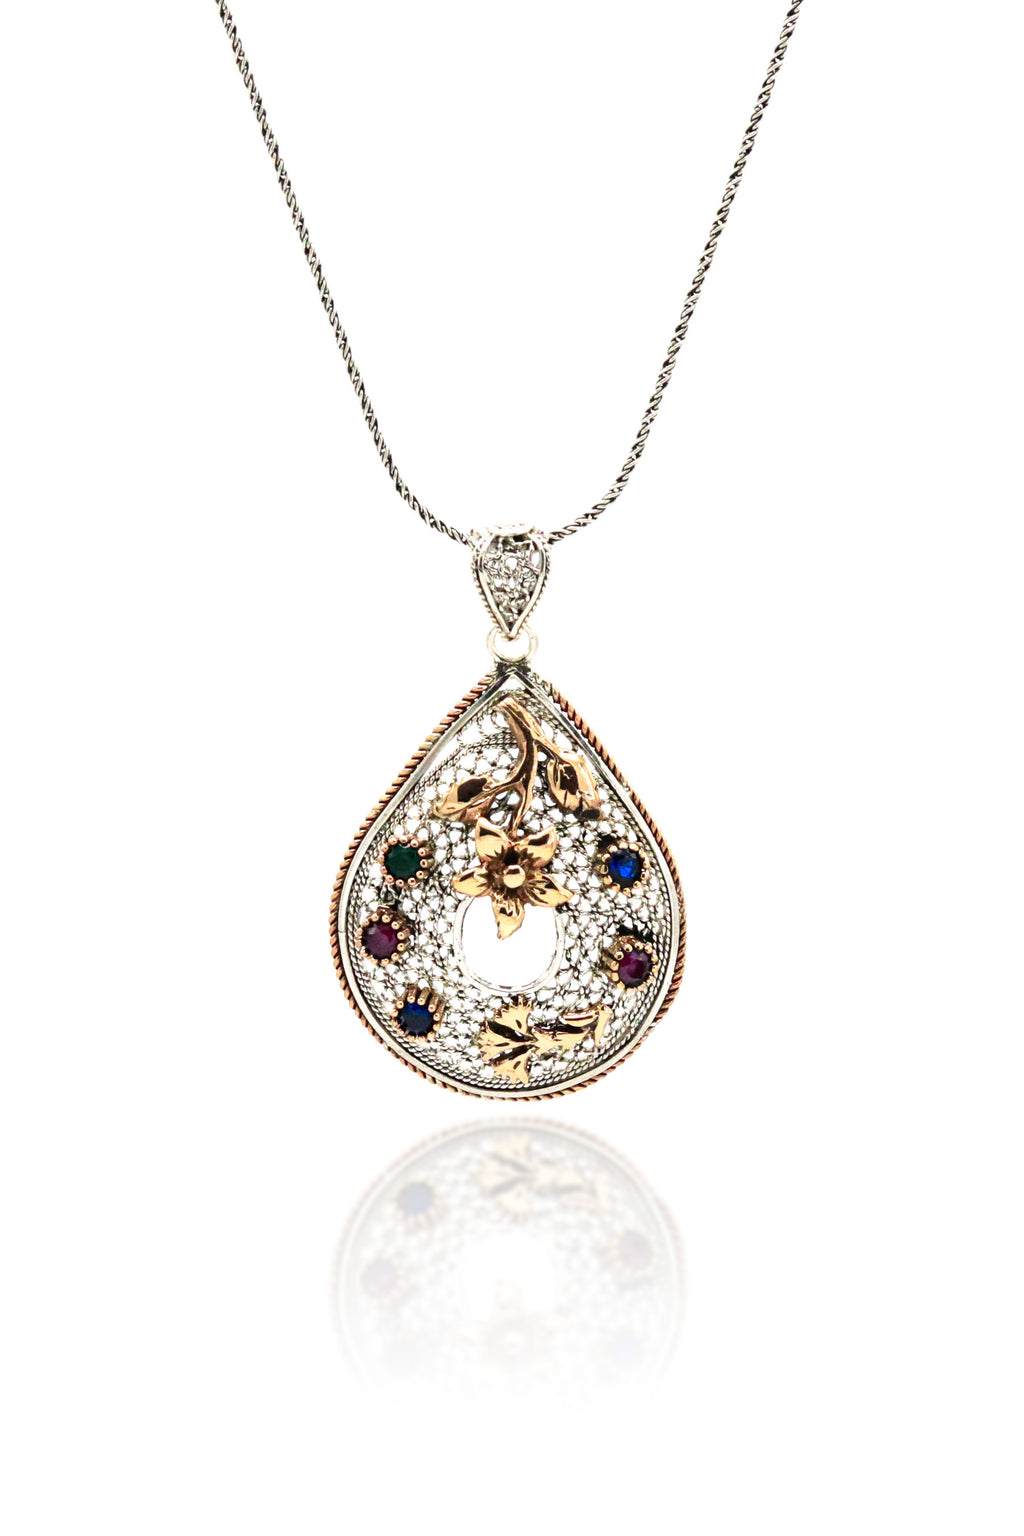 Floral Model Authentic Filigree Silver Necklace (NG201019409)